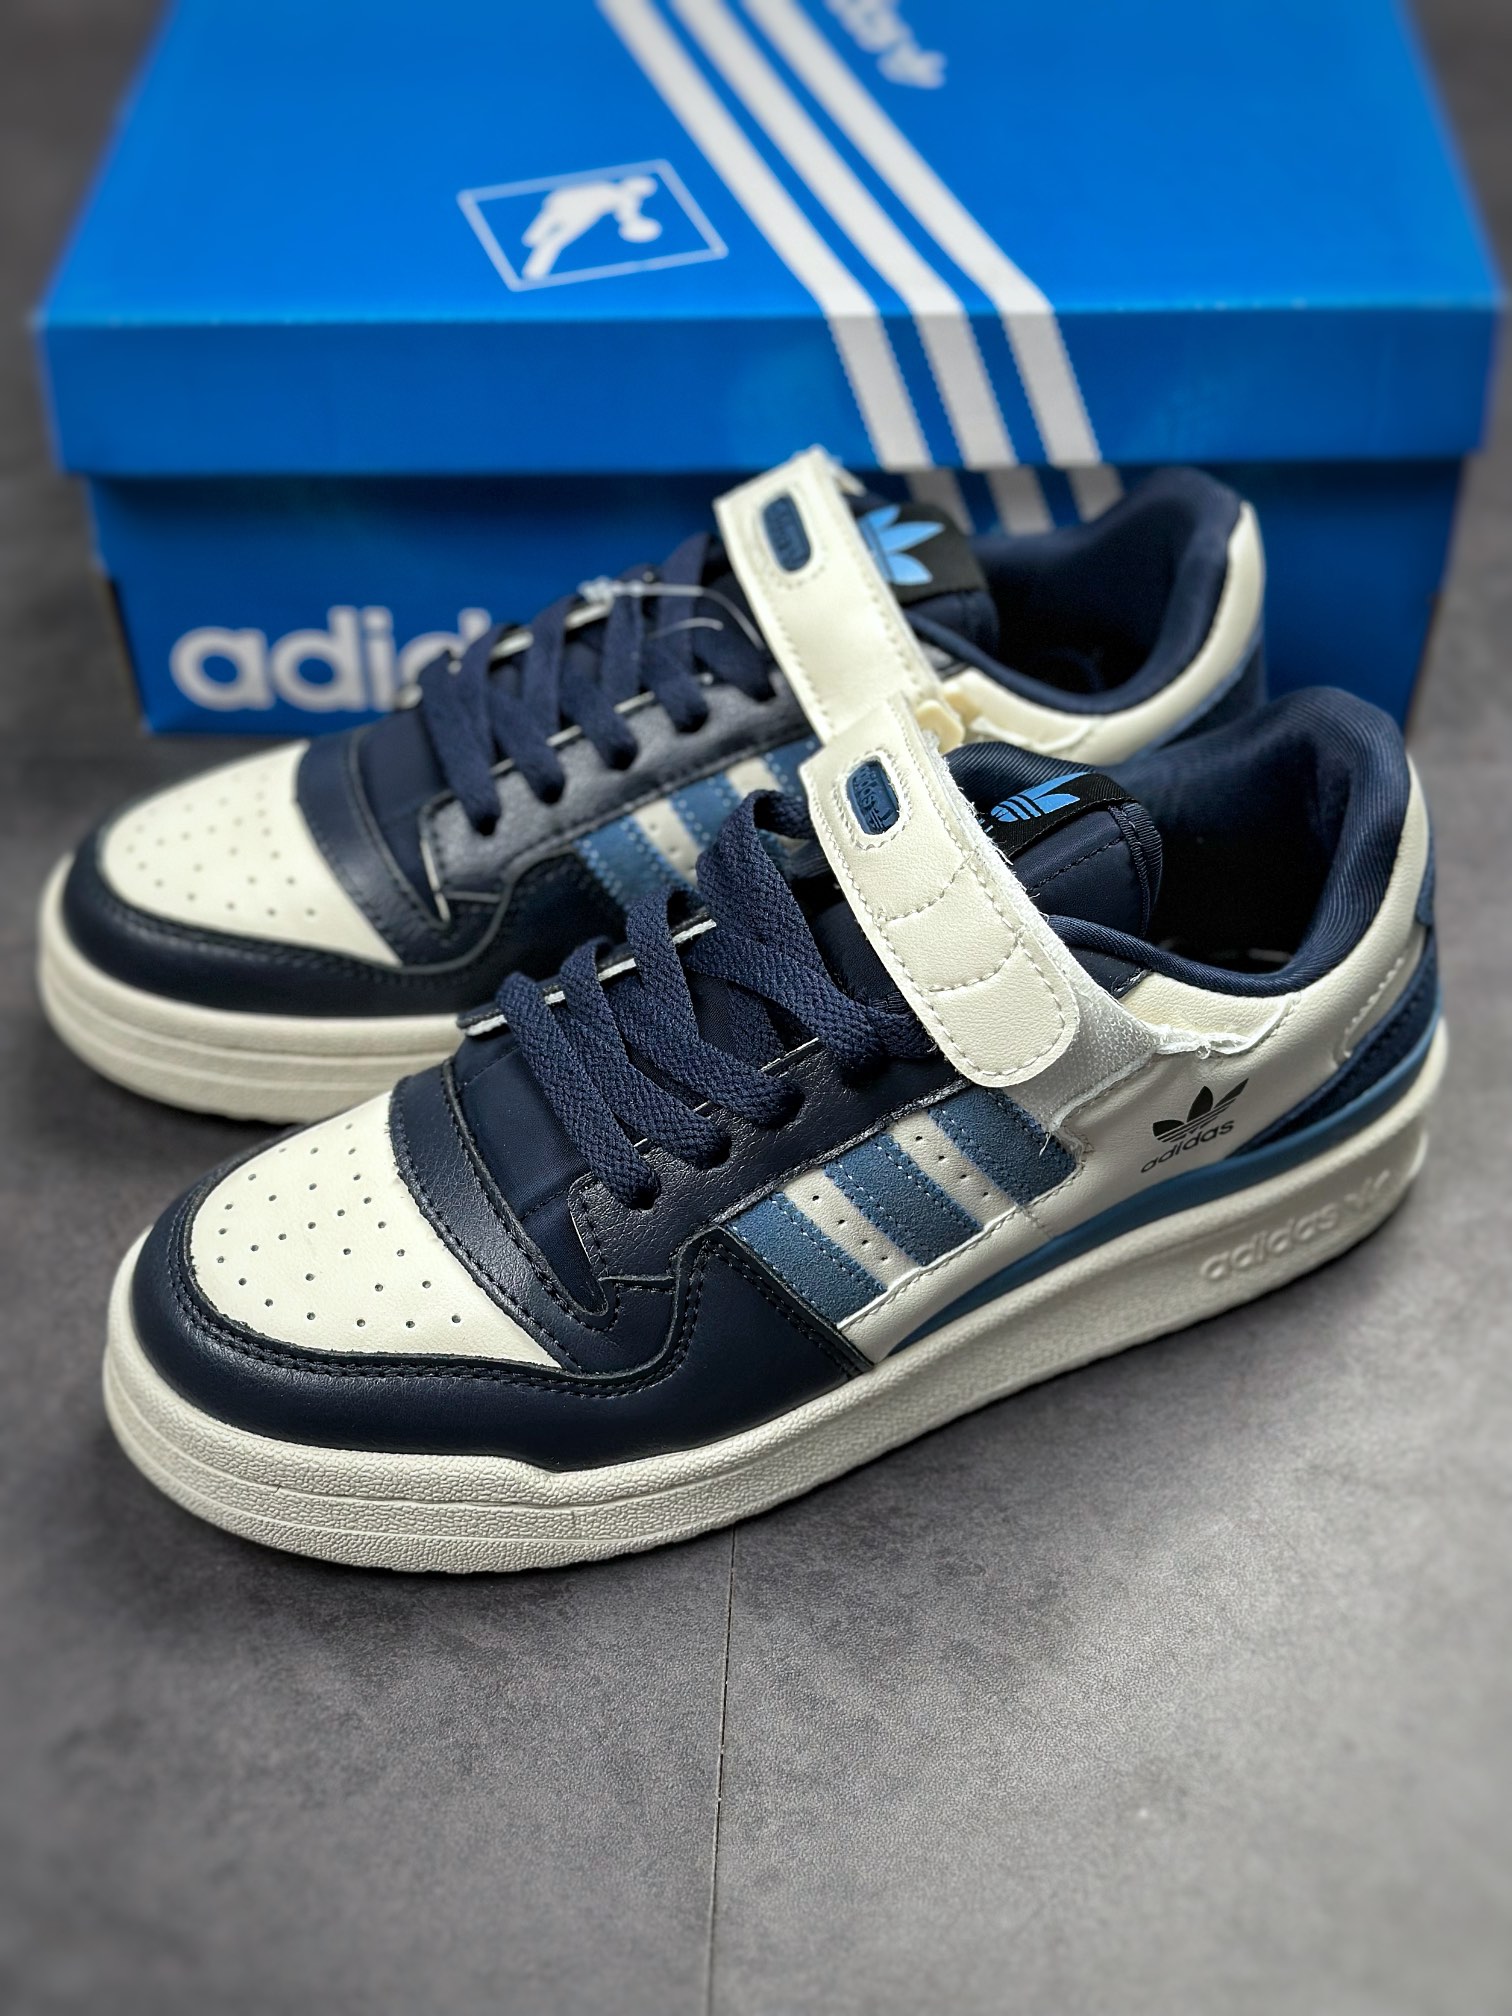 Adidas Forum 84 Low OG low top all-match trend casual sports shoes GX2162